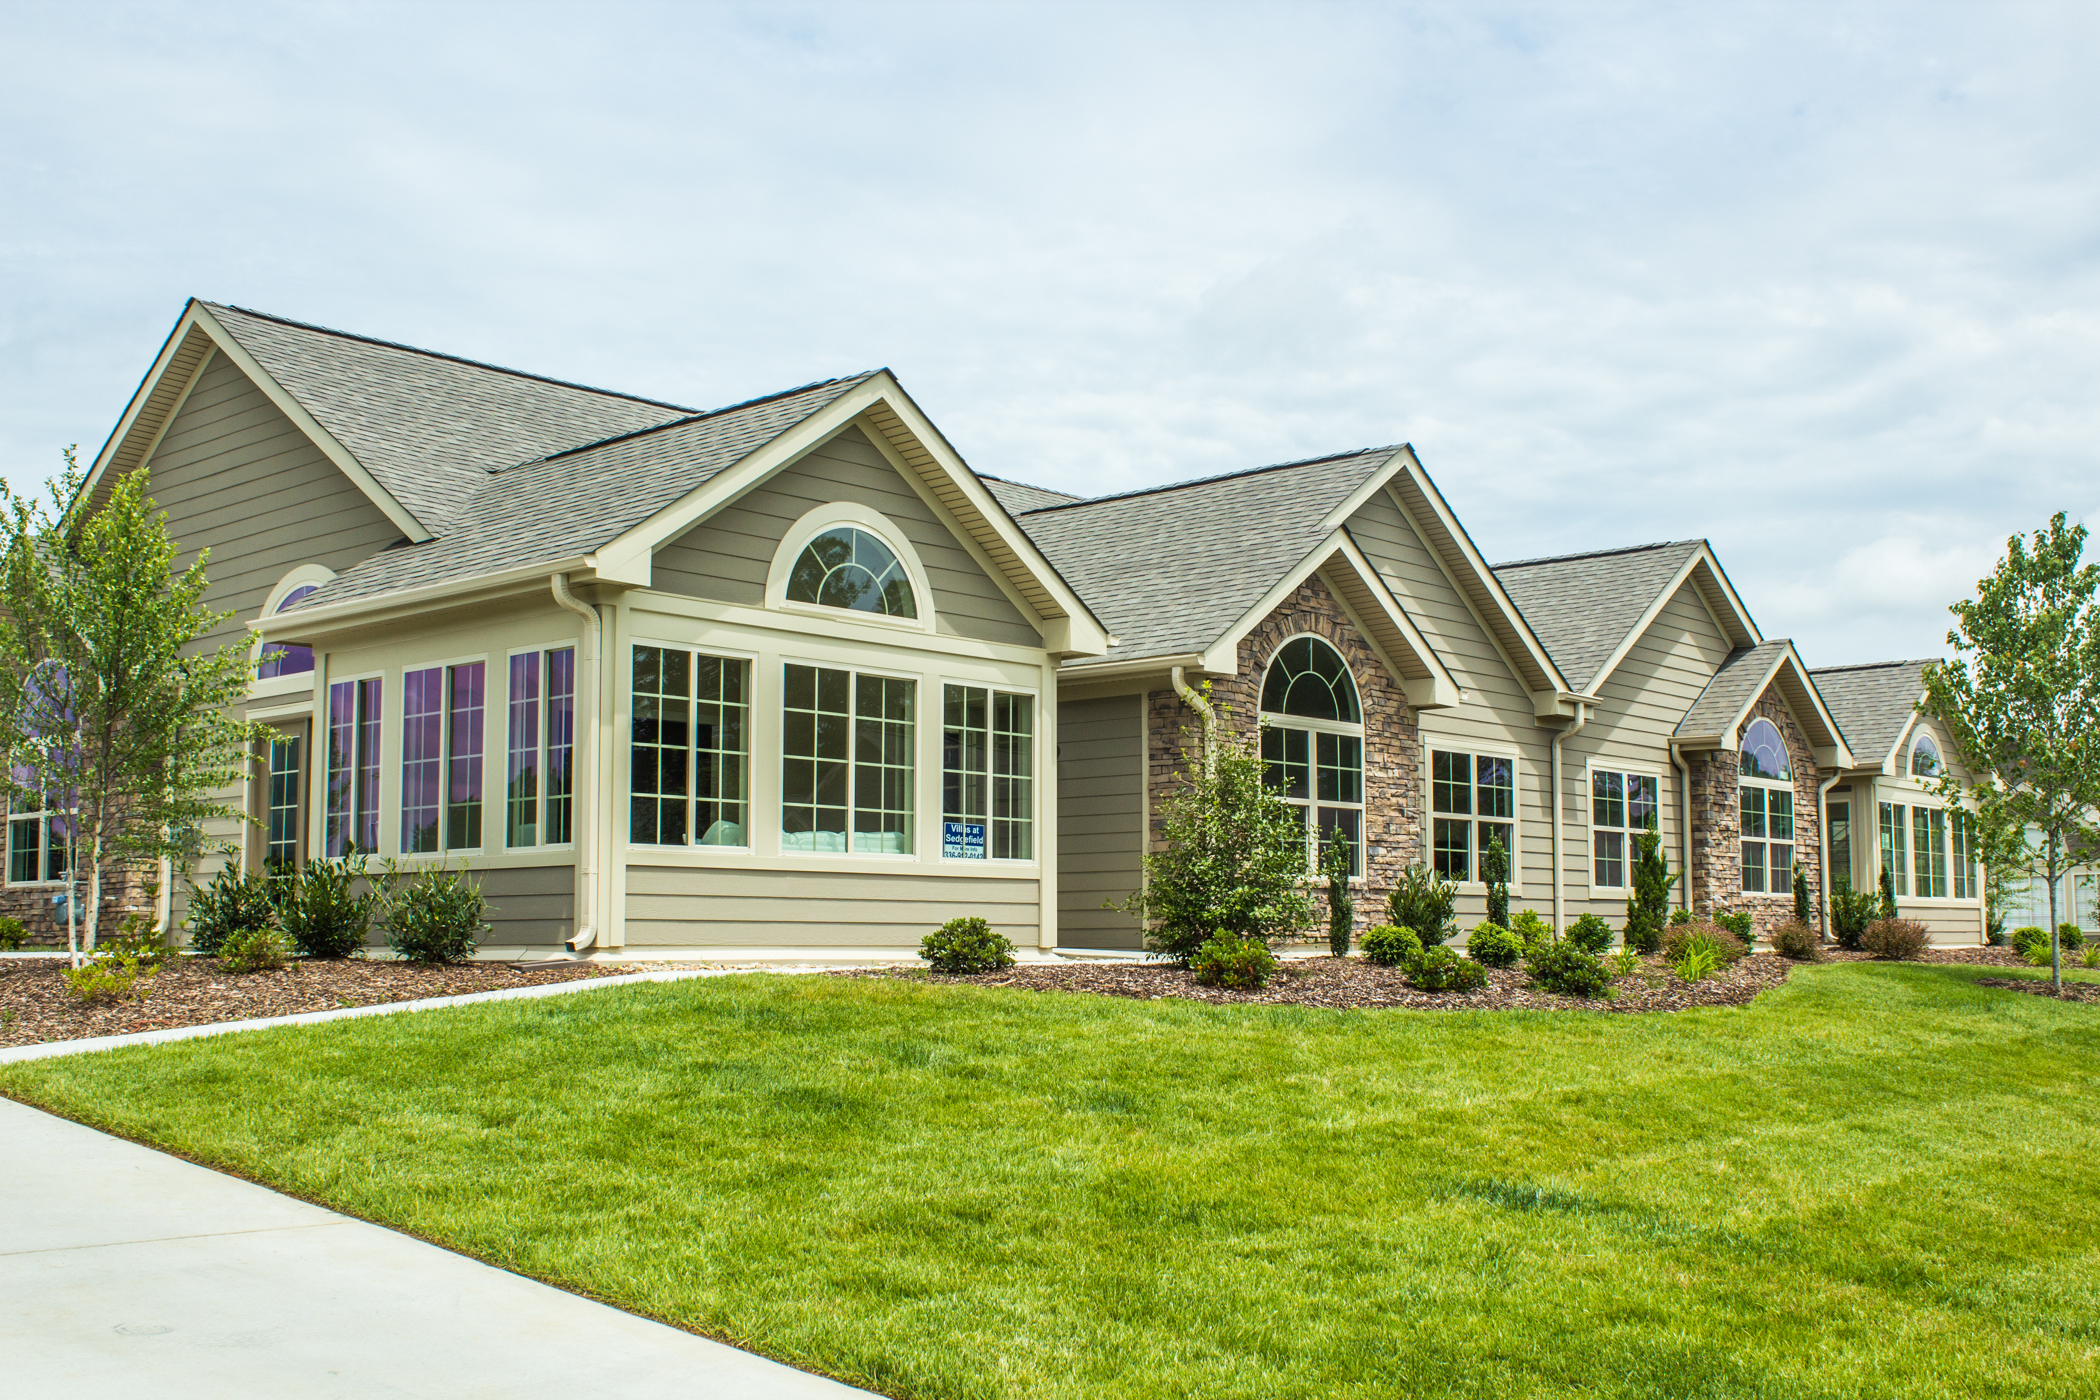 Residents don't have to worry about exterior maintenance in their new ranch home.